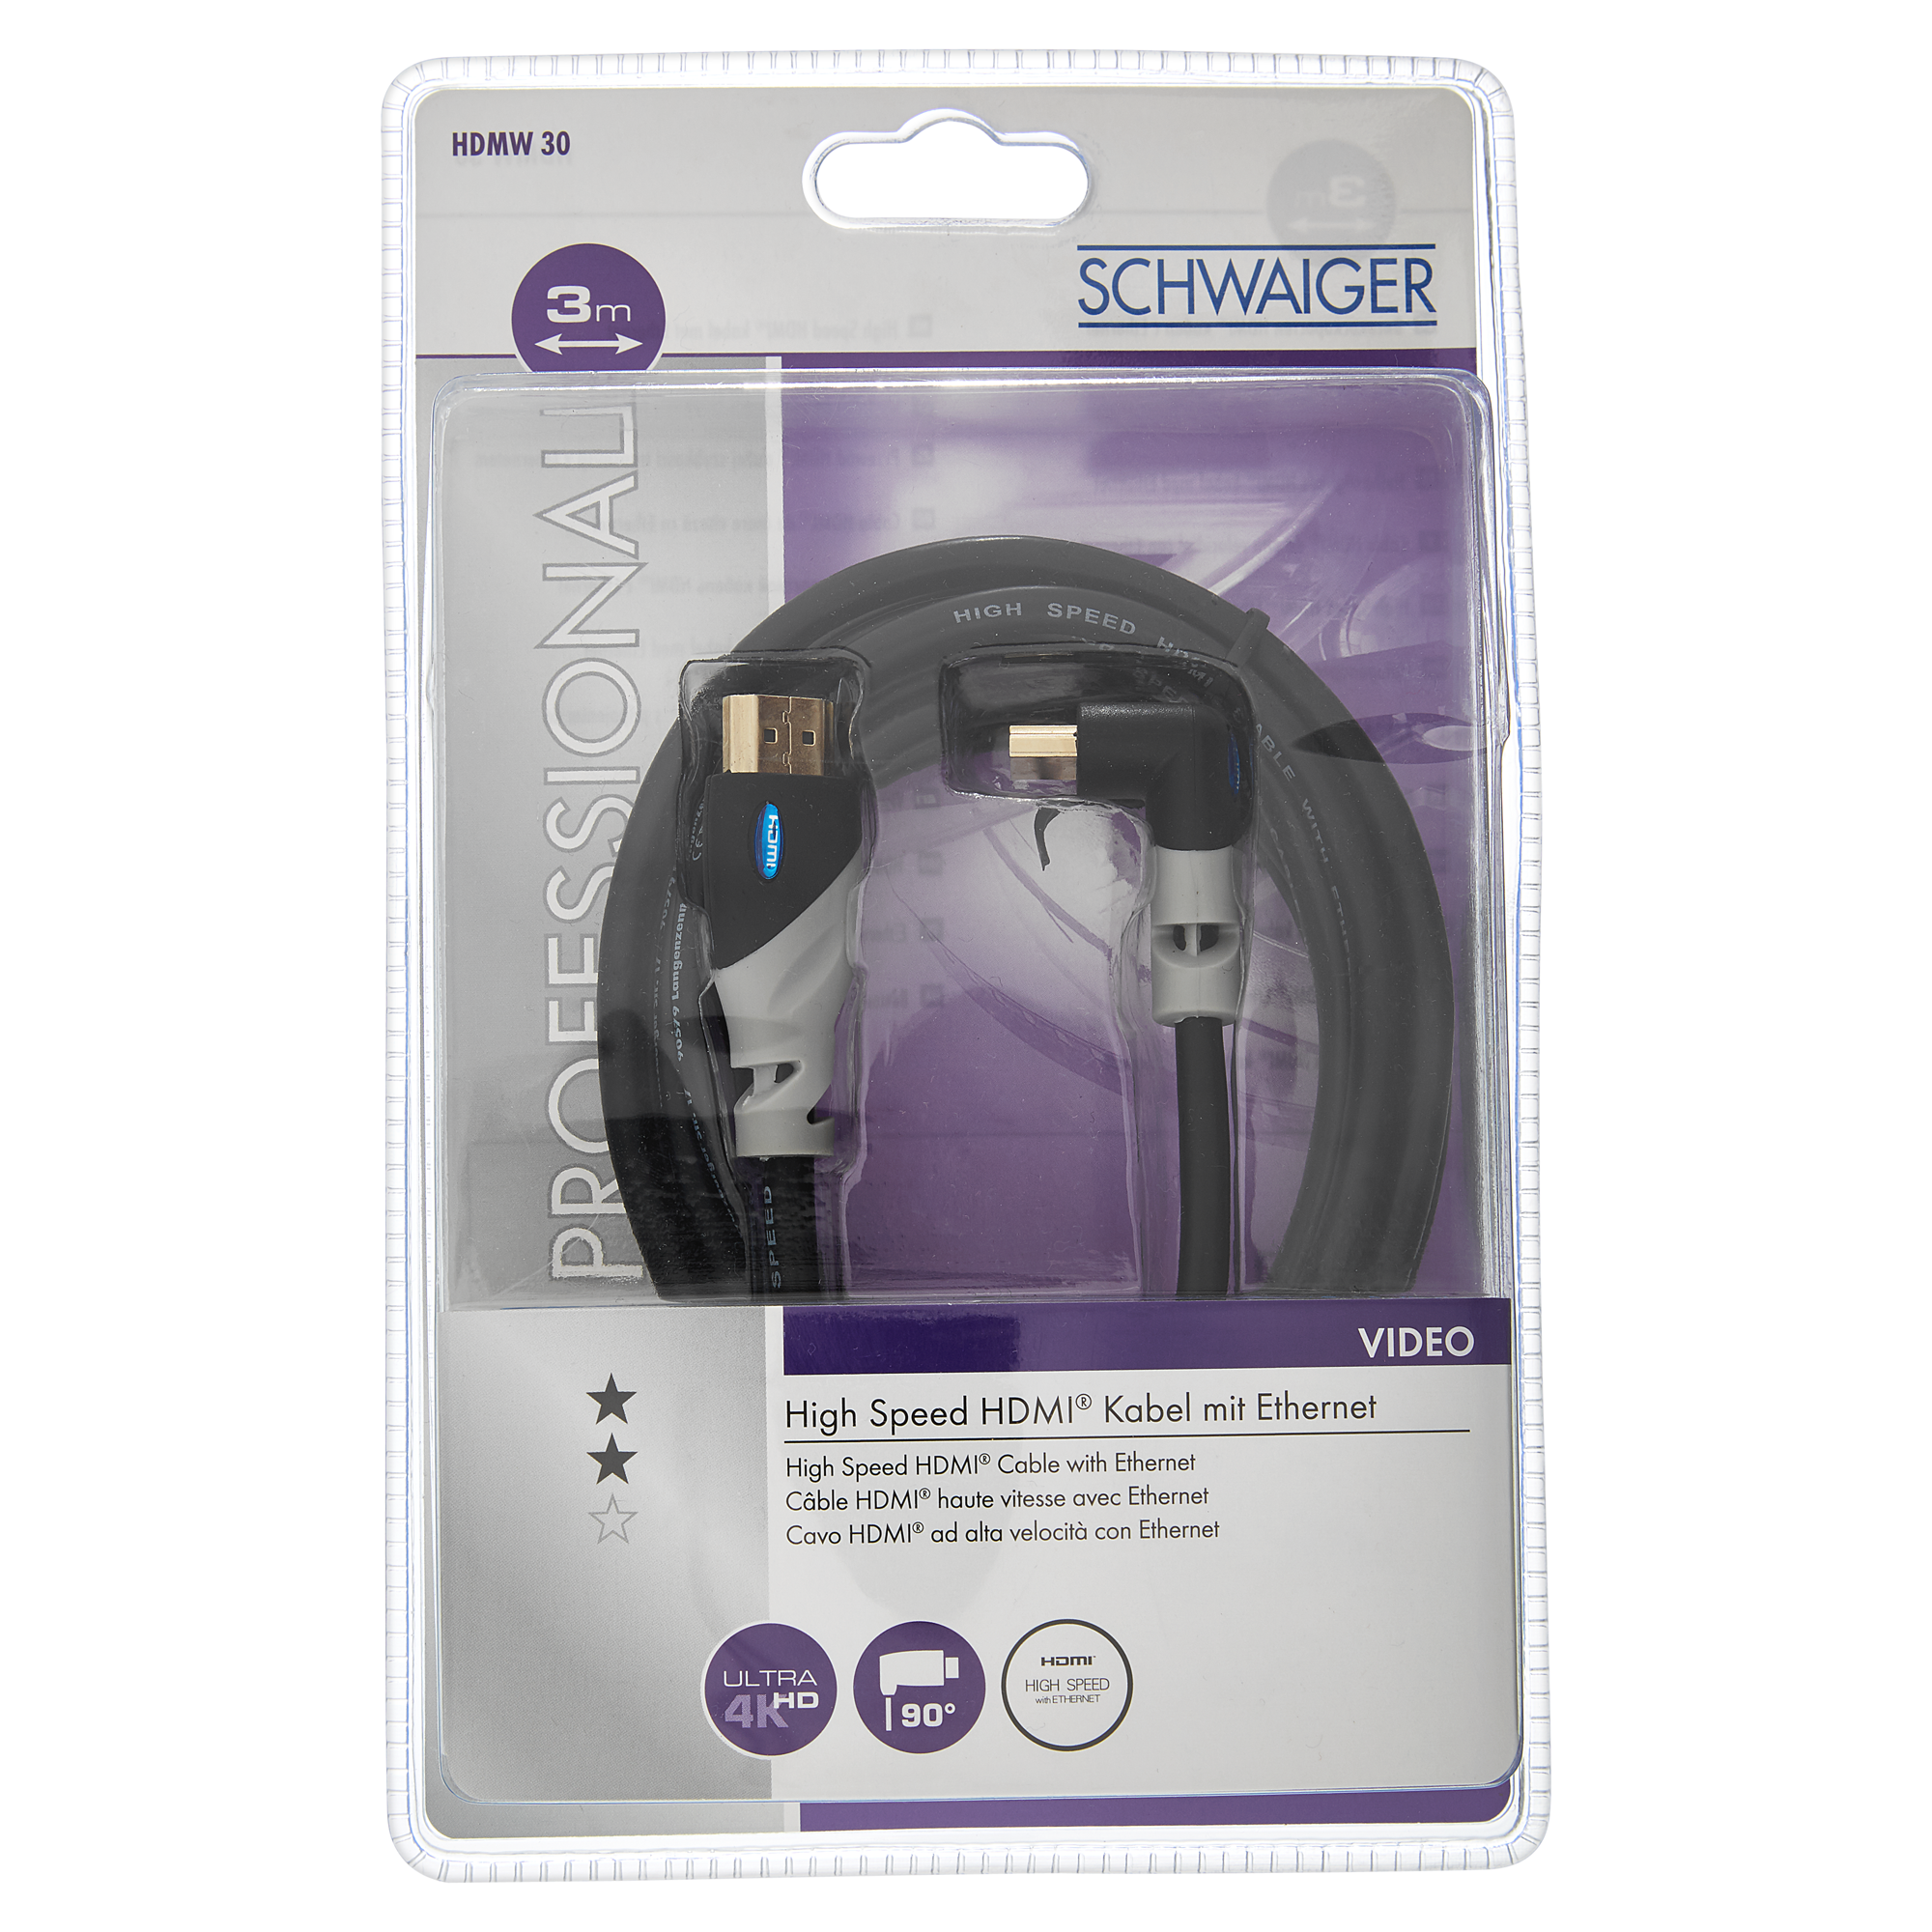 HDMI-Kabel High Speed Ethernet schwarz 3 m + product picture